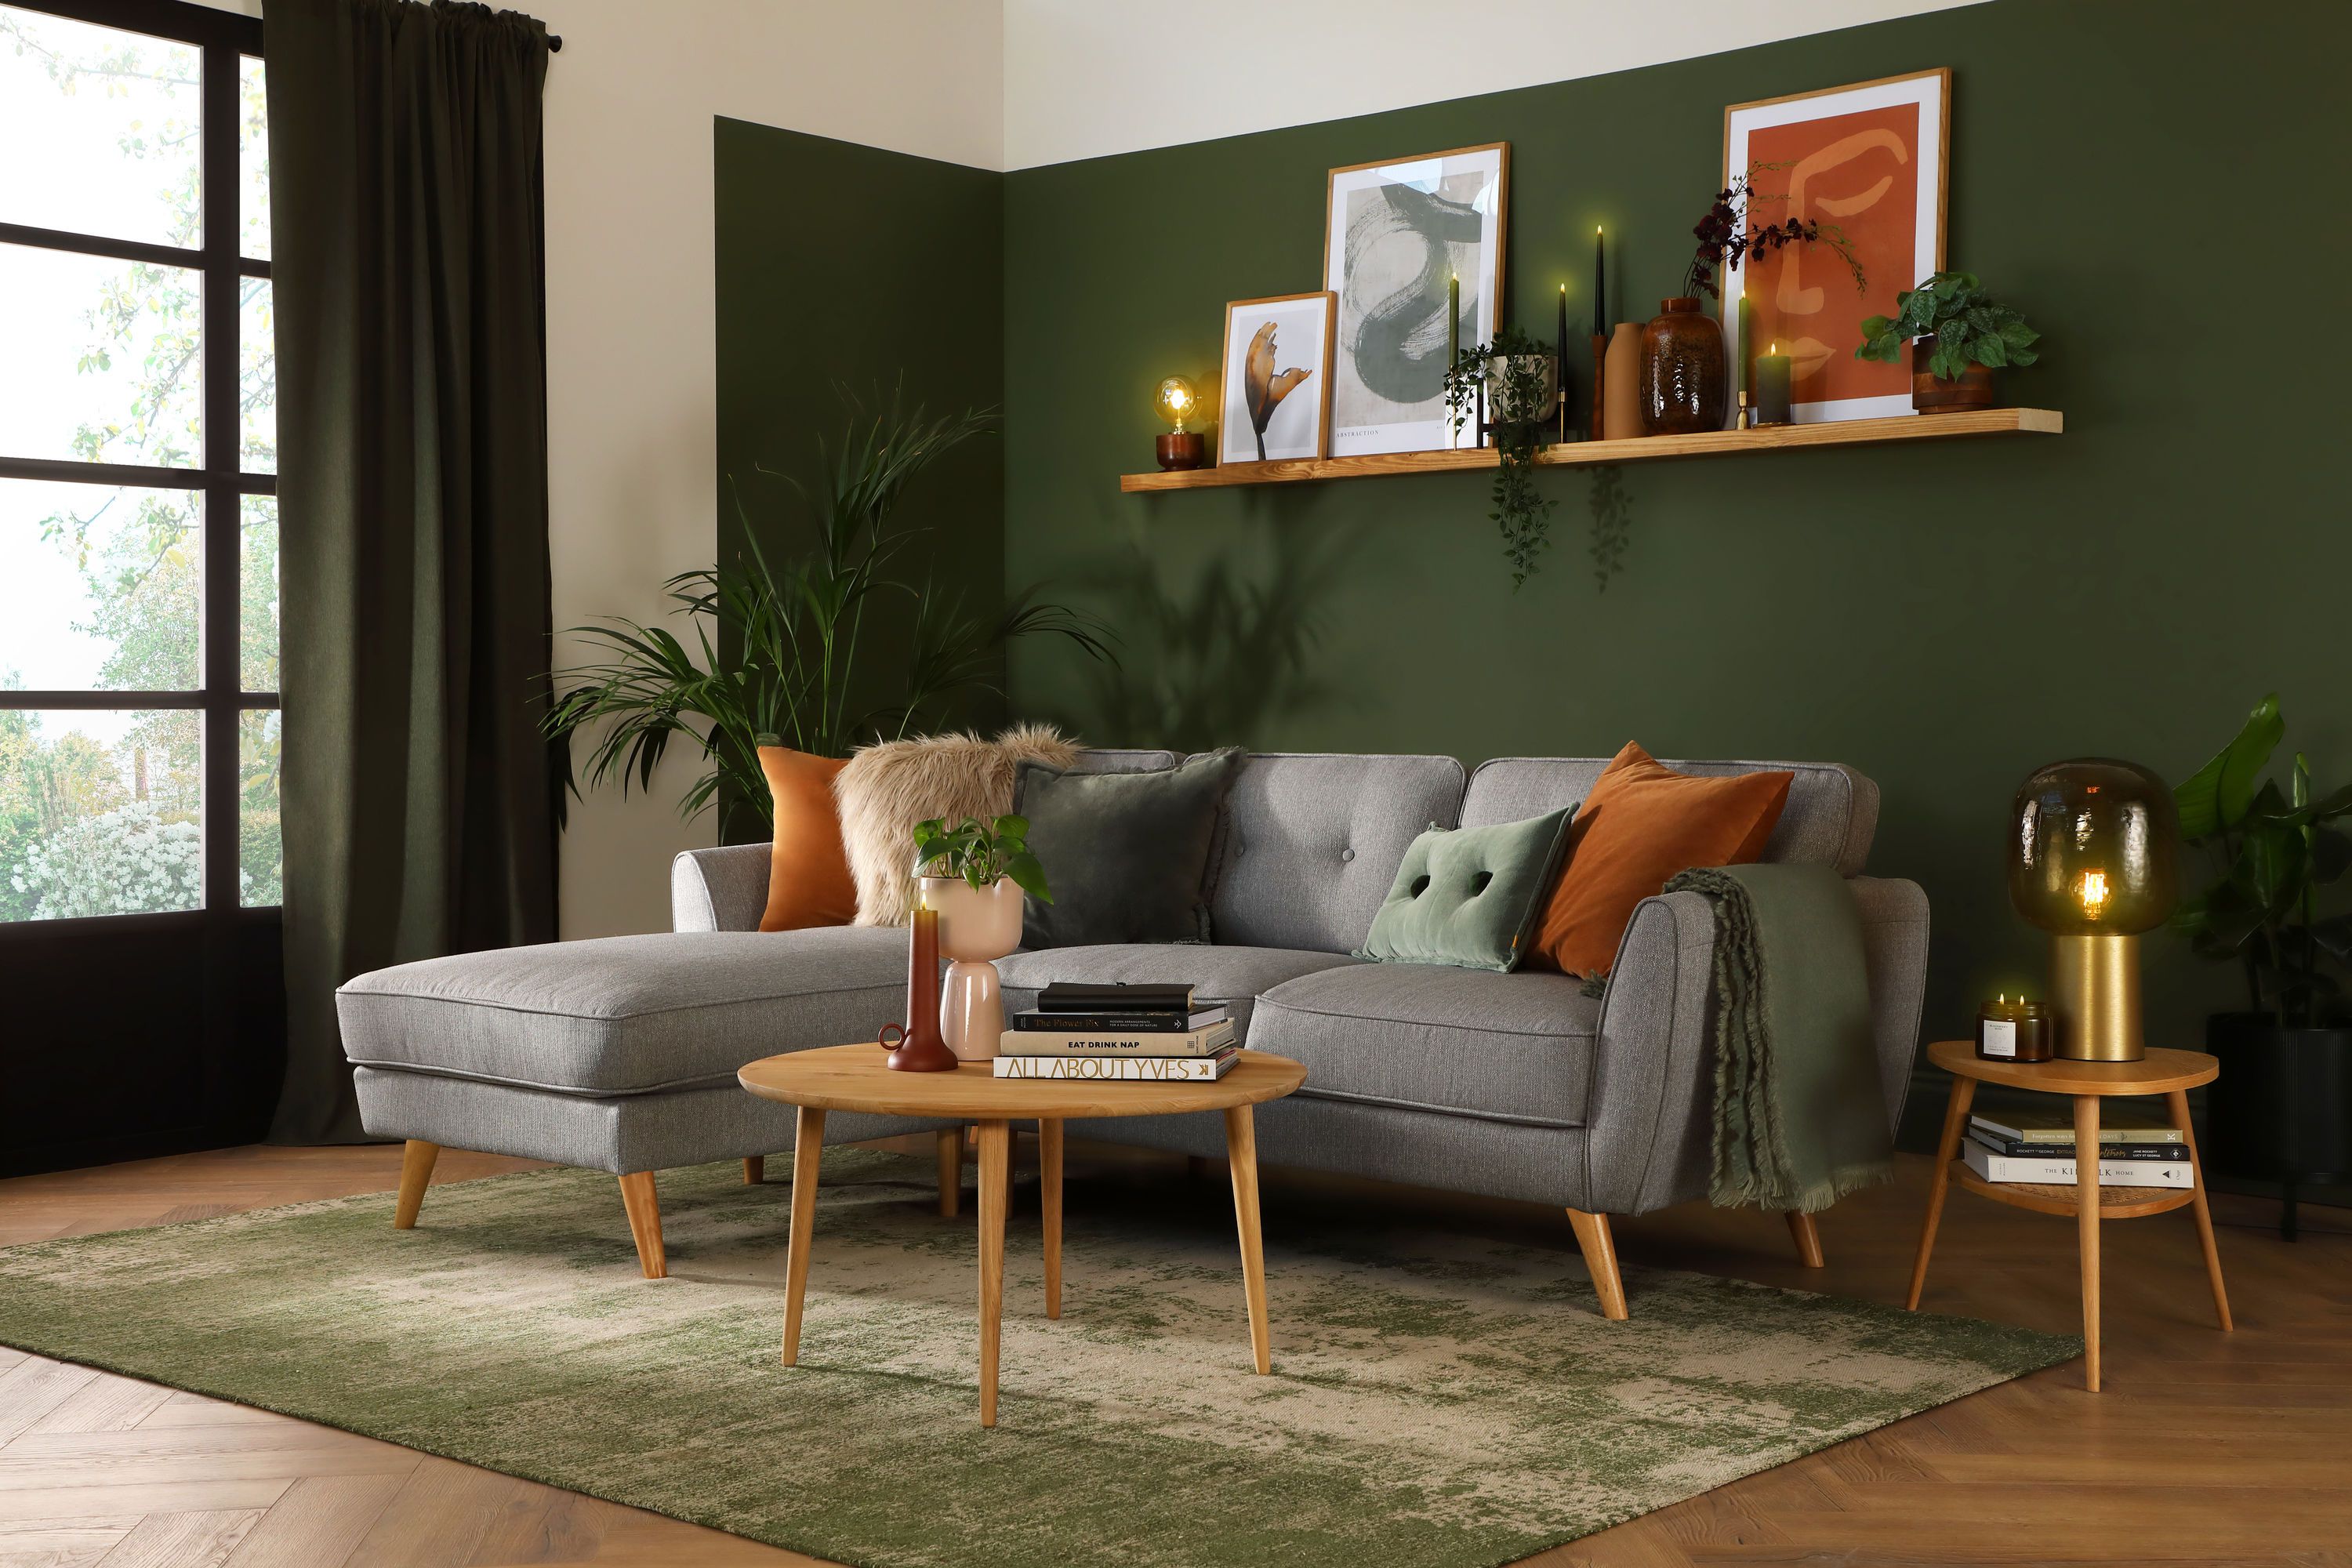 8 of the coolest ideas for an inspiring green living room | Inspiration